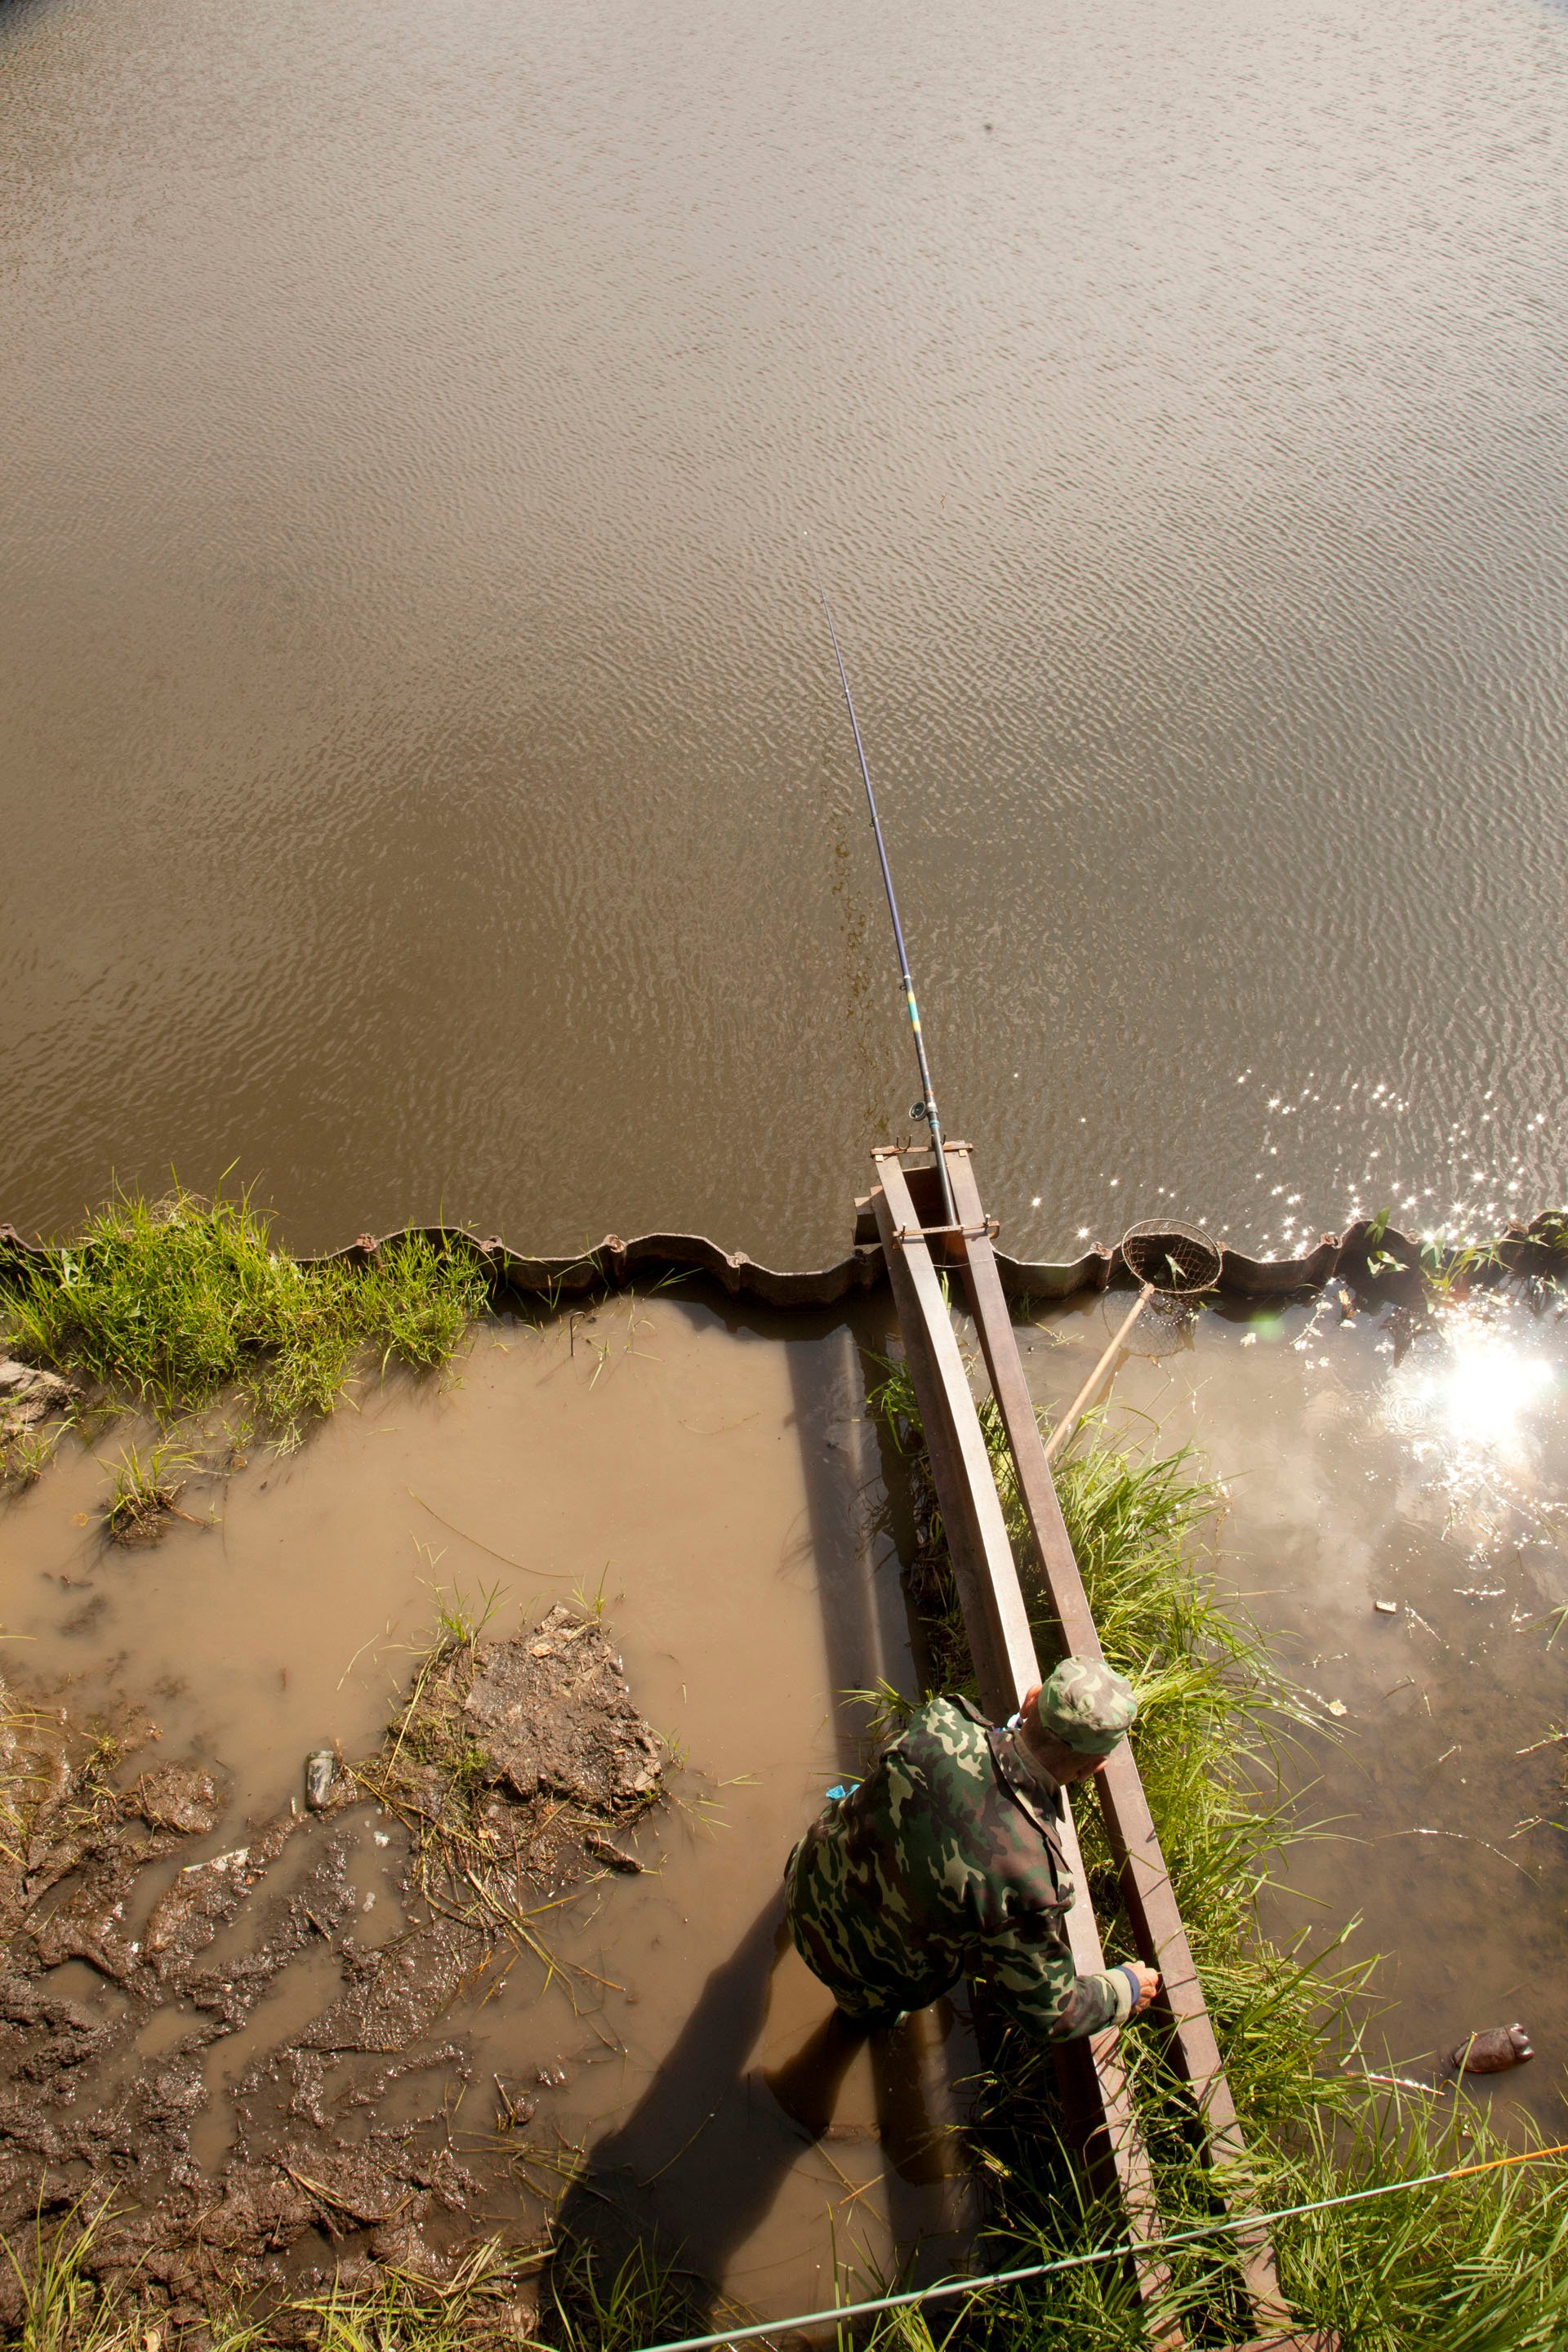 A man sets up his fishing pole under a bridge in town